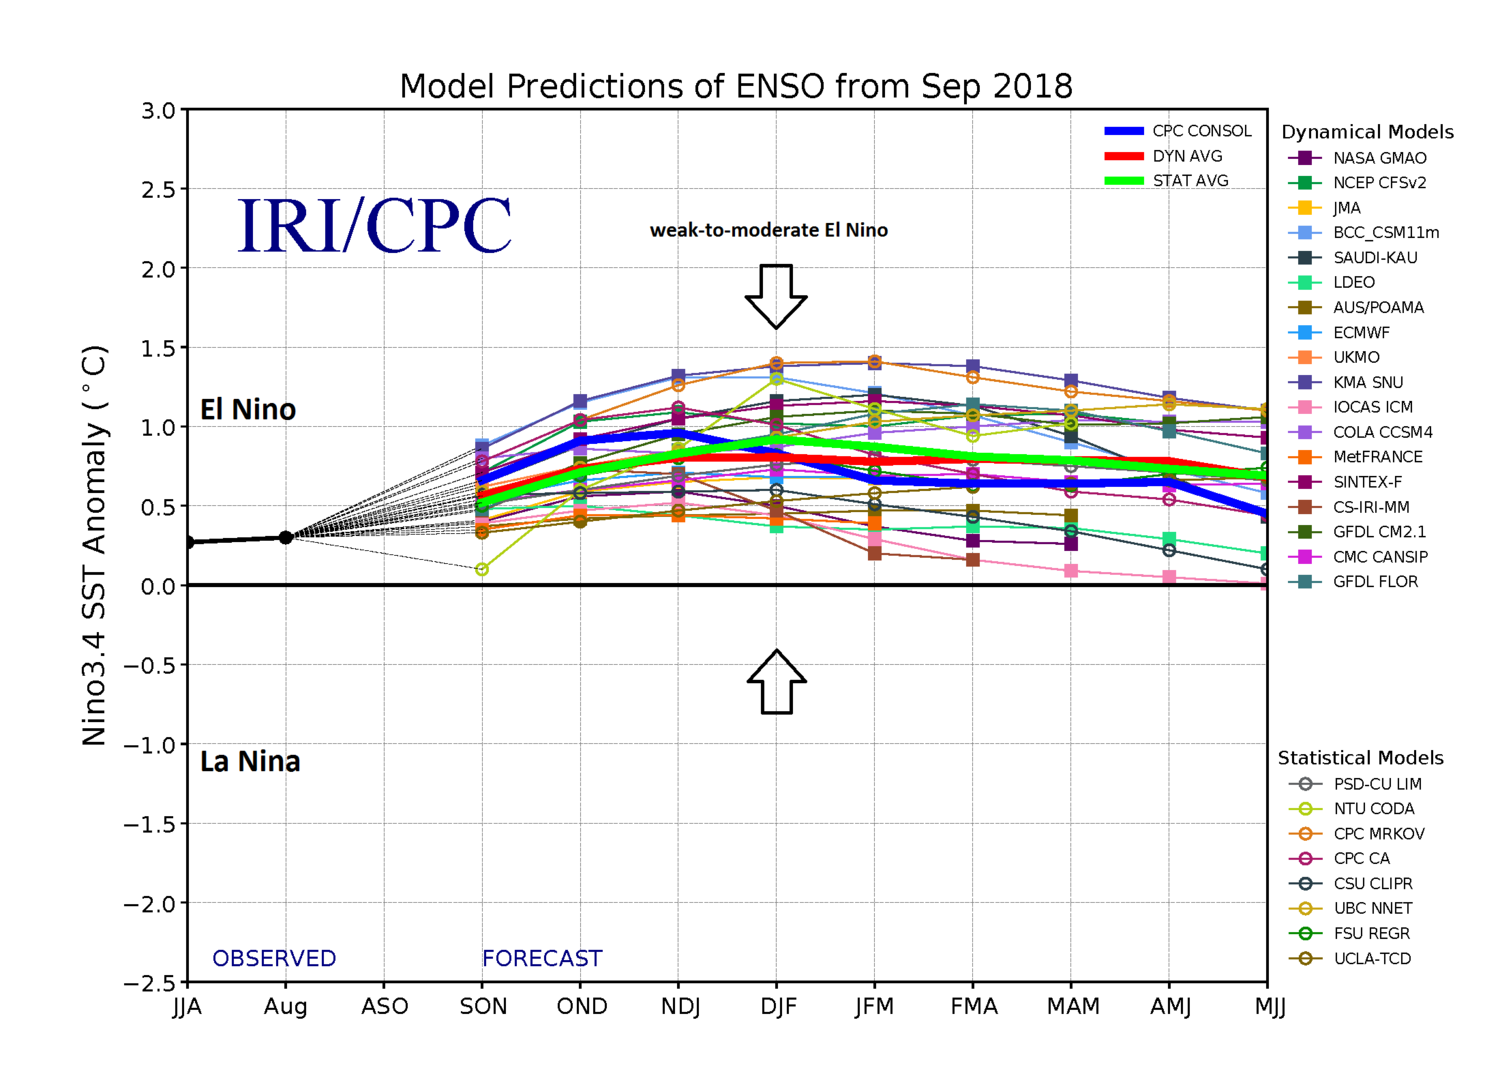  The consensus of numerous dynamical and statistical computer models is for a weak-to-moderate El Nino this winter season in the equatorial part of the Pacific Ocean; courtesy NOAA, NASA, ECMWF, IRI/CPC 